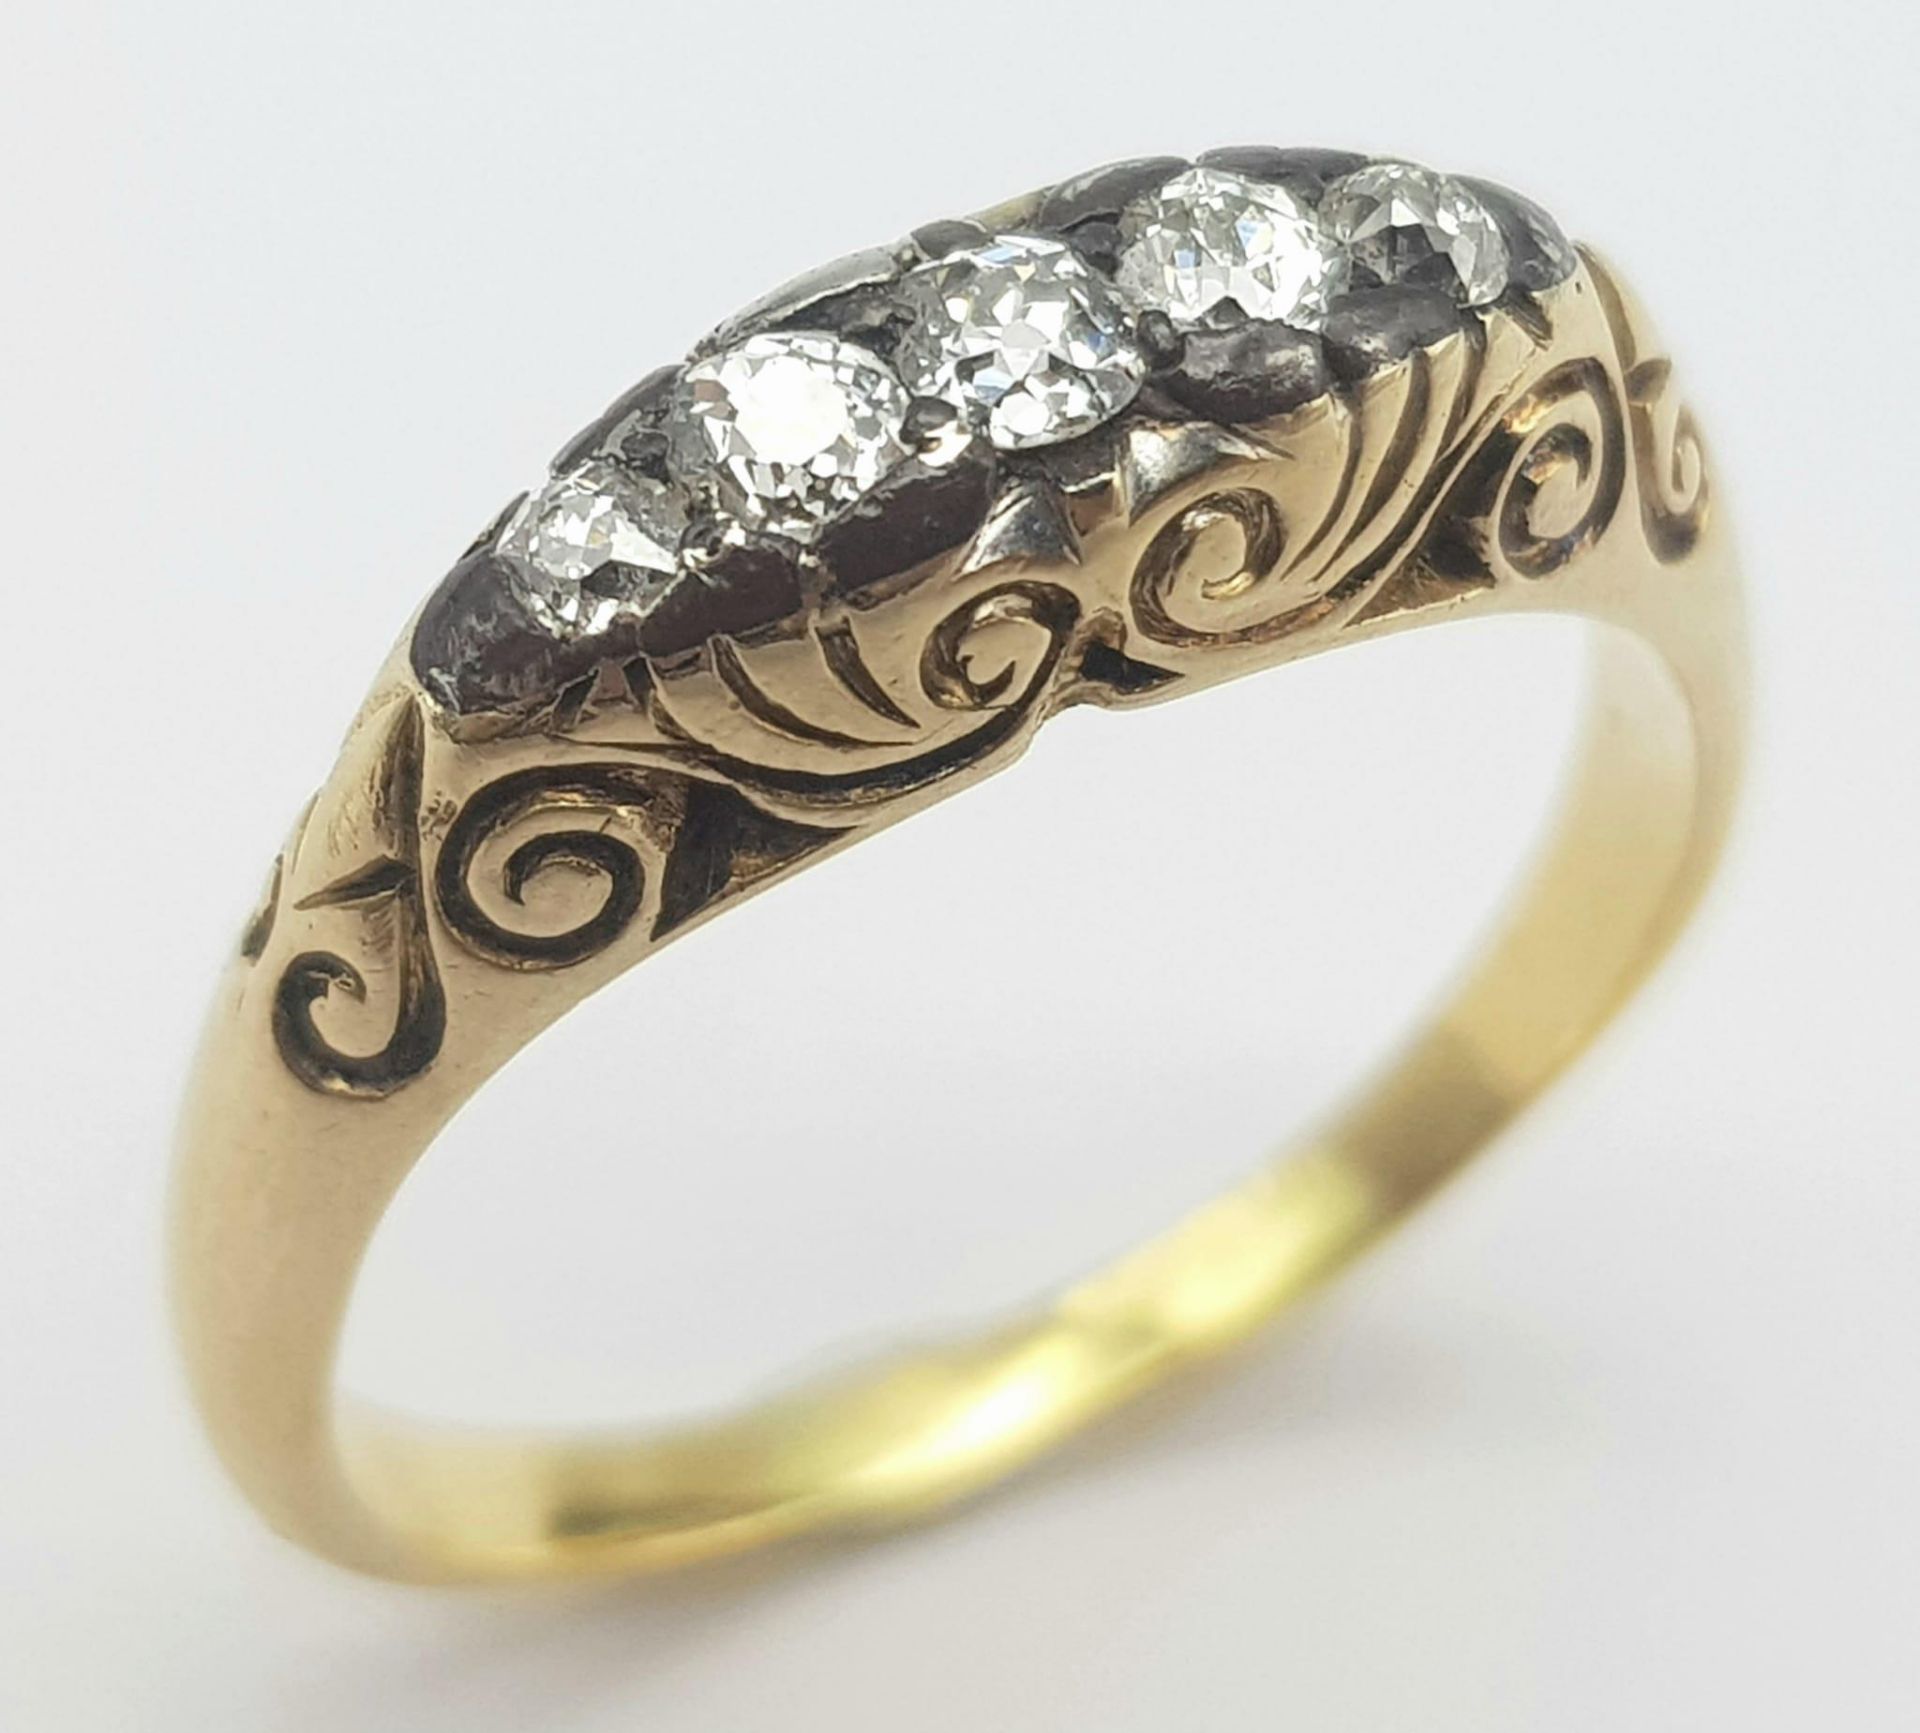 An 18K Yellow Gold Diamond Gypsy Ring. 0.15ctw diamonds. Size P. 4.9g total weight.